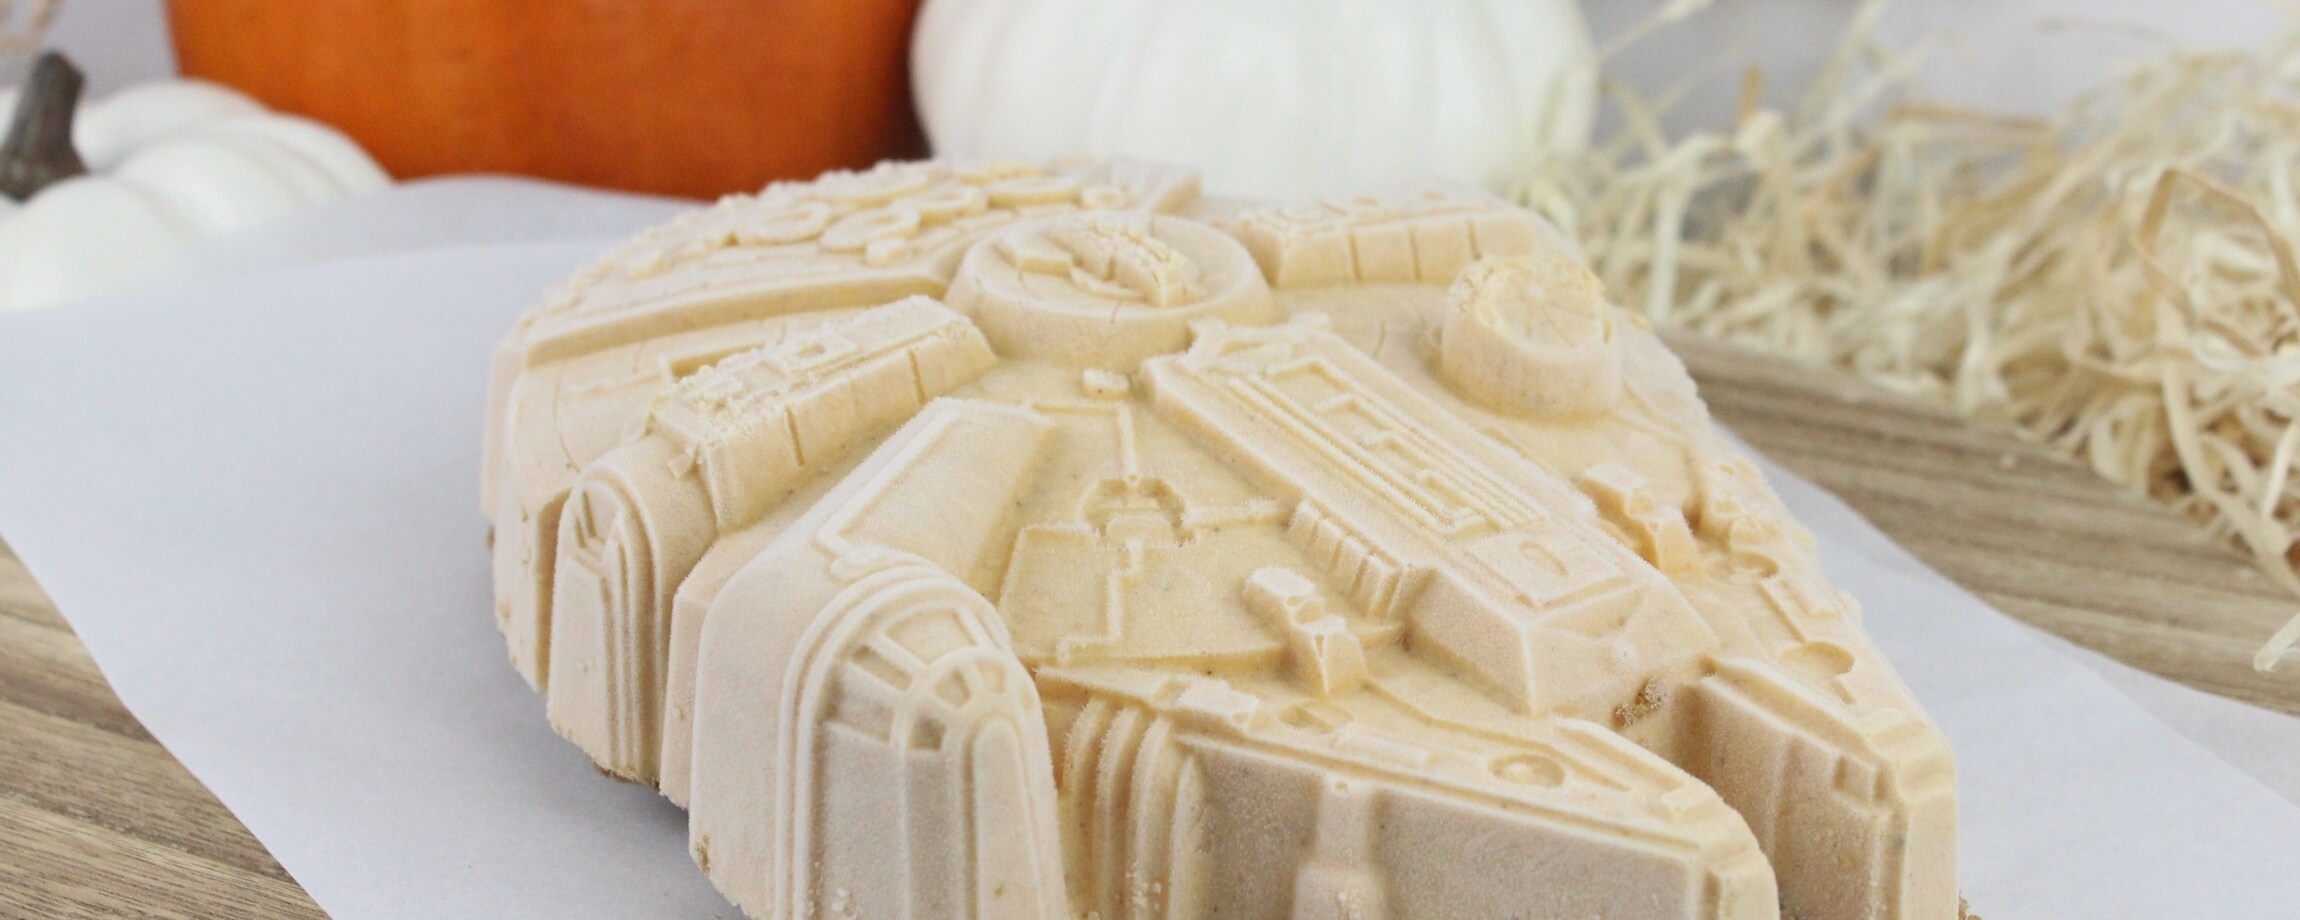 A pumpkin spice Millennium Falcon-shaped ice cream dessert as displayed in a holiday setting.